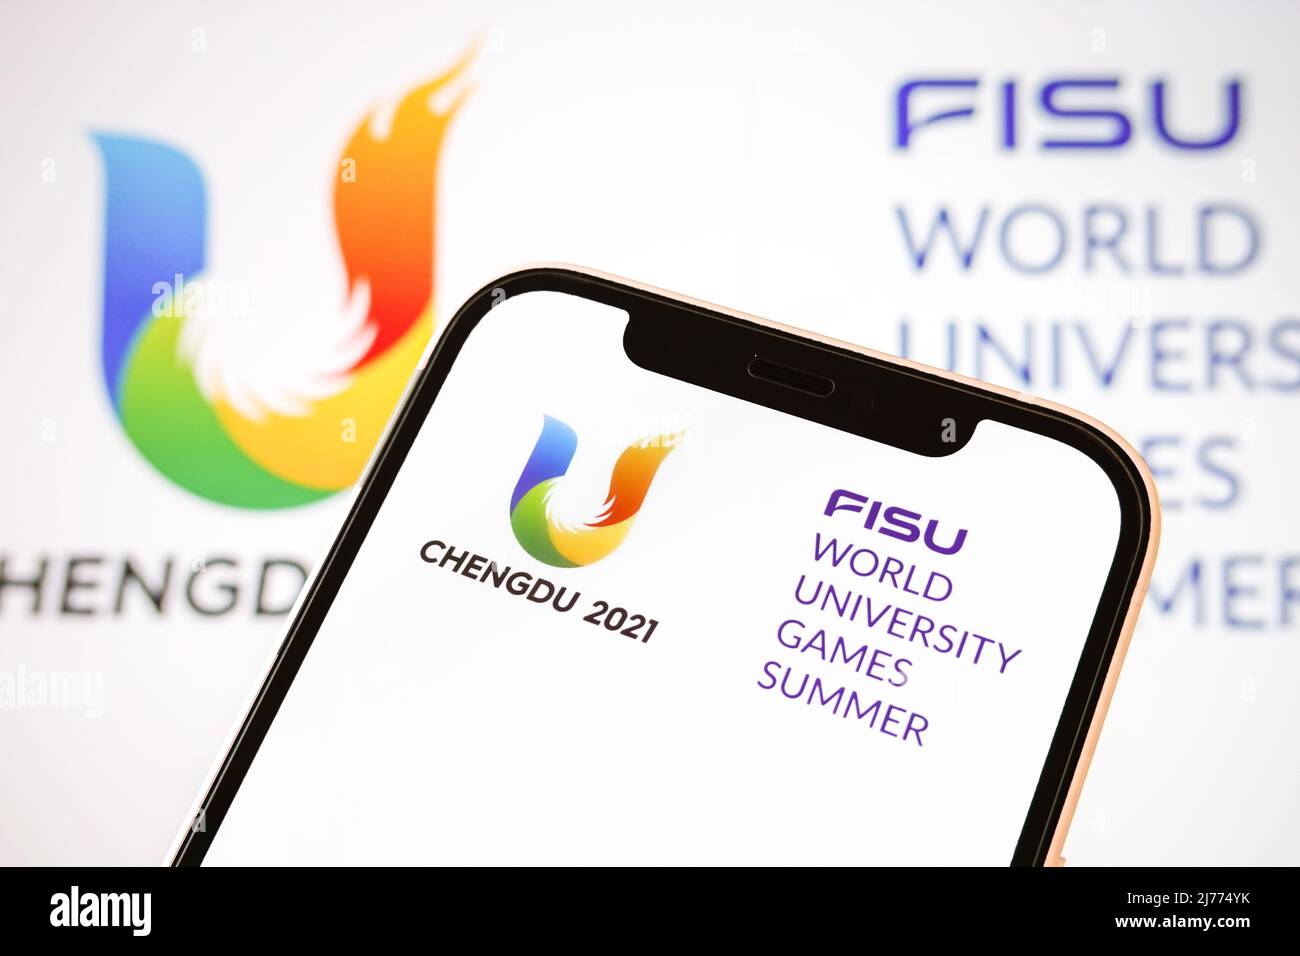 May 6, 2022, China: In this photo illustration, the logo of Chengdu World University Games is displayed on a smartphone screen. The Chengdu 2021 World University Games has been postponed until 2023, the International University Sports Federation (FISU) announced on Friday..The FISU Games had initially been scheduled for the summer of 2021 but were rescheduled for June this year following the postponement of the Olympic Games in Tokyo 2020. (Credit Image: © Sheldon Cooper/SOPA Images via ZUMA Press Wire) Stock Photo